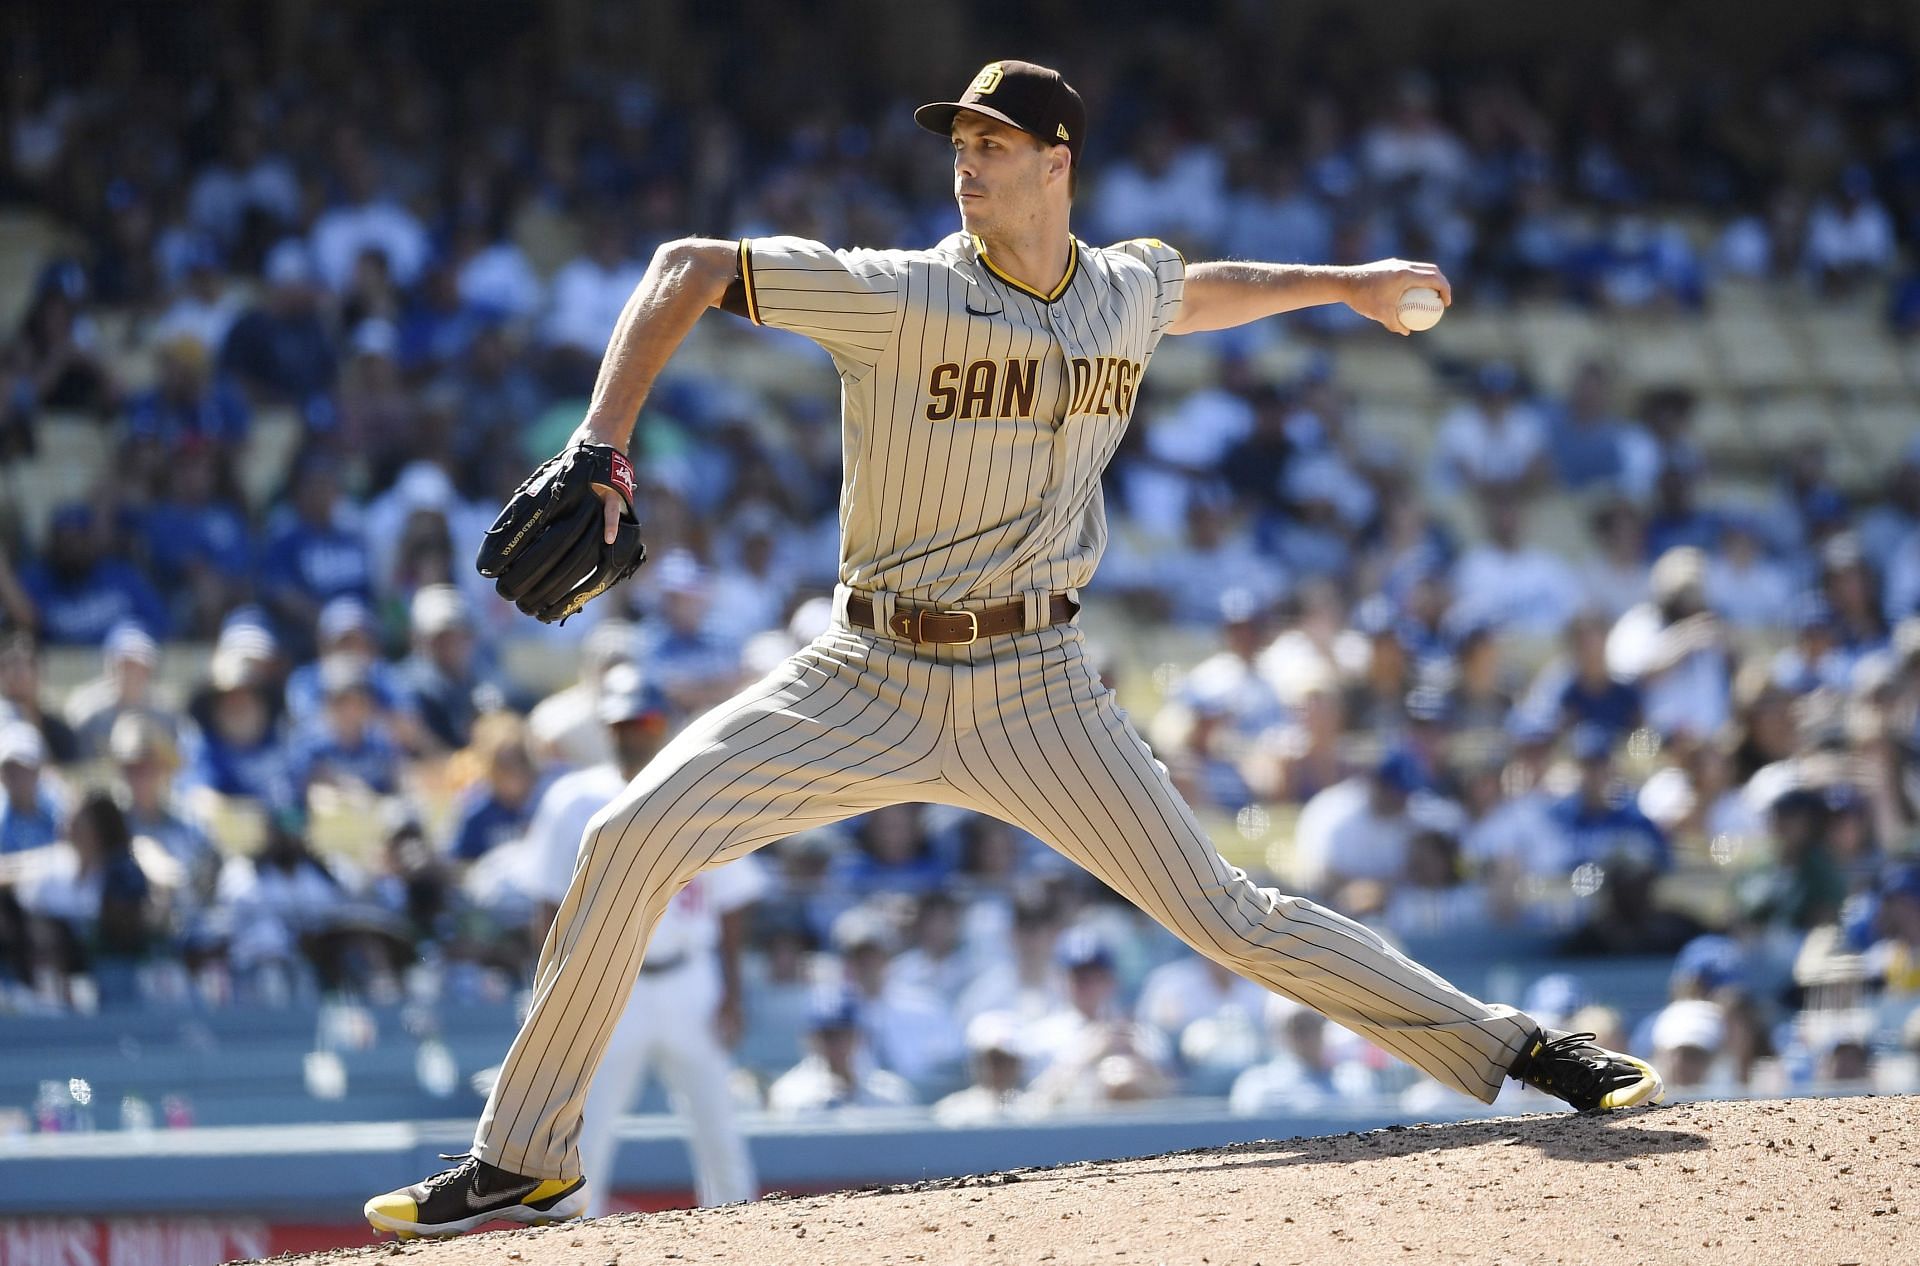 San Diego Padres to play San Francisco Giants in historic MLB